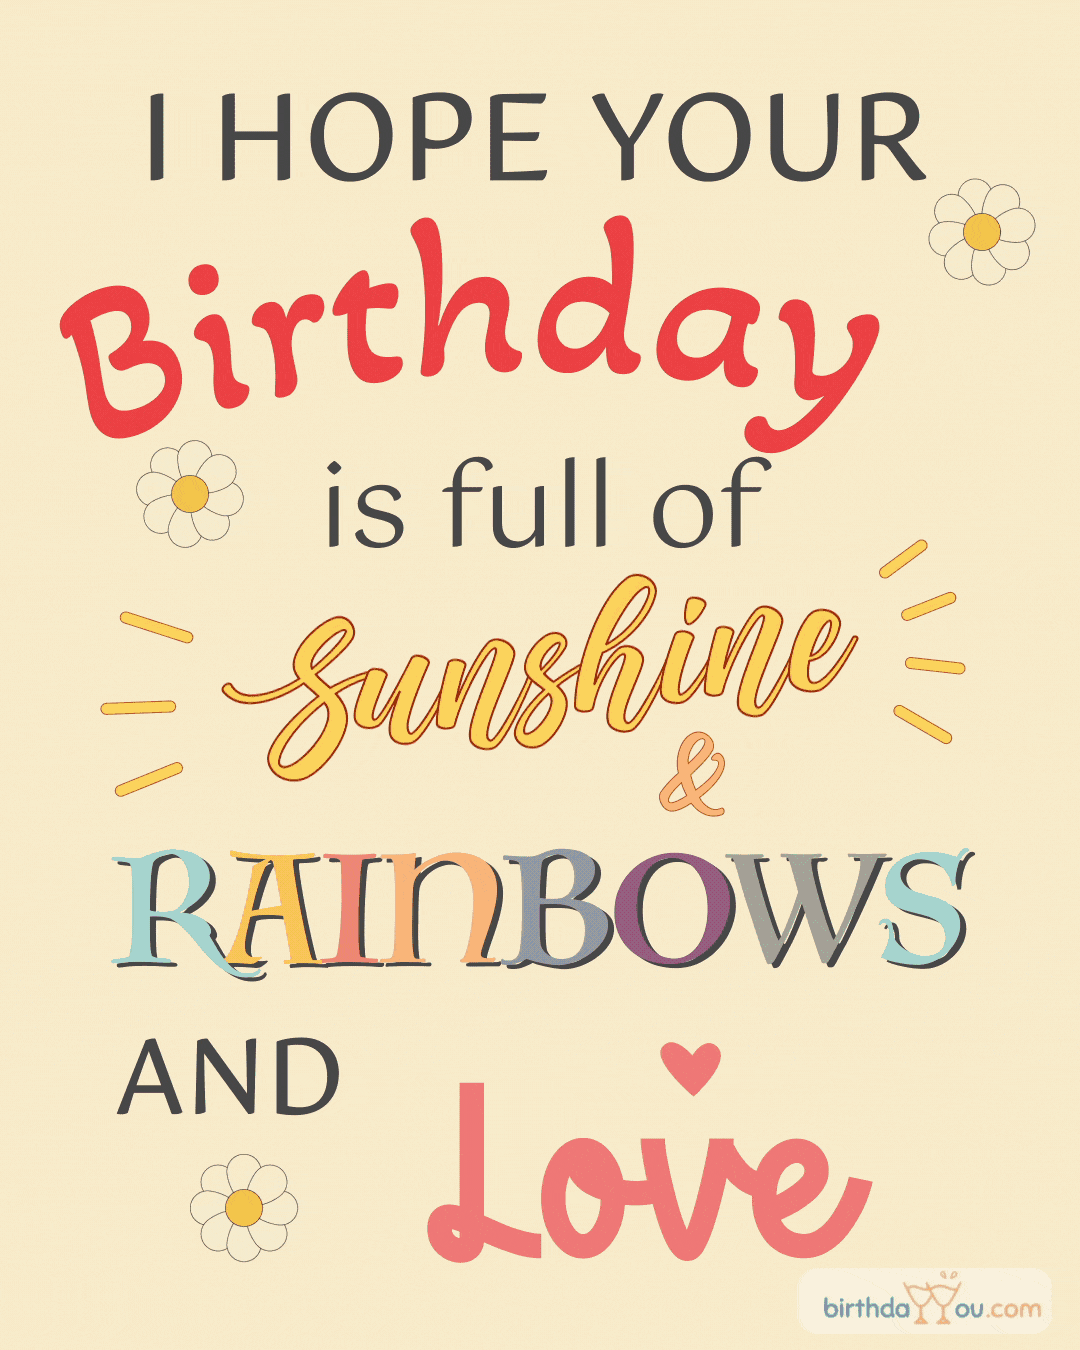 Best Wishes Yellow Happy Birthday Animated Images and GIFs ...